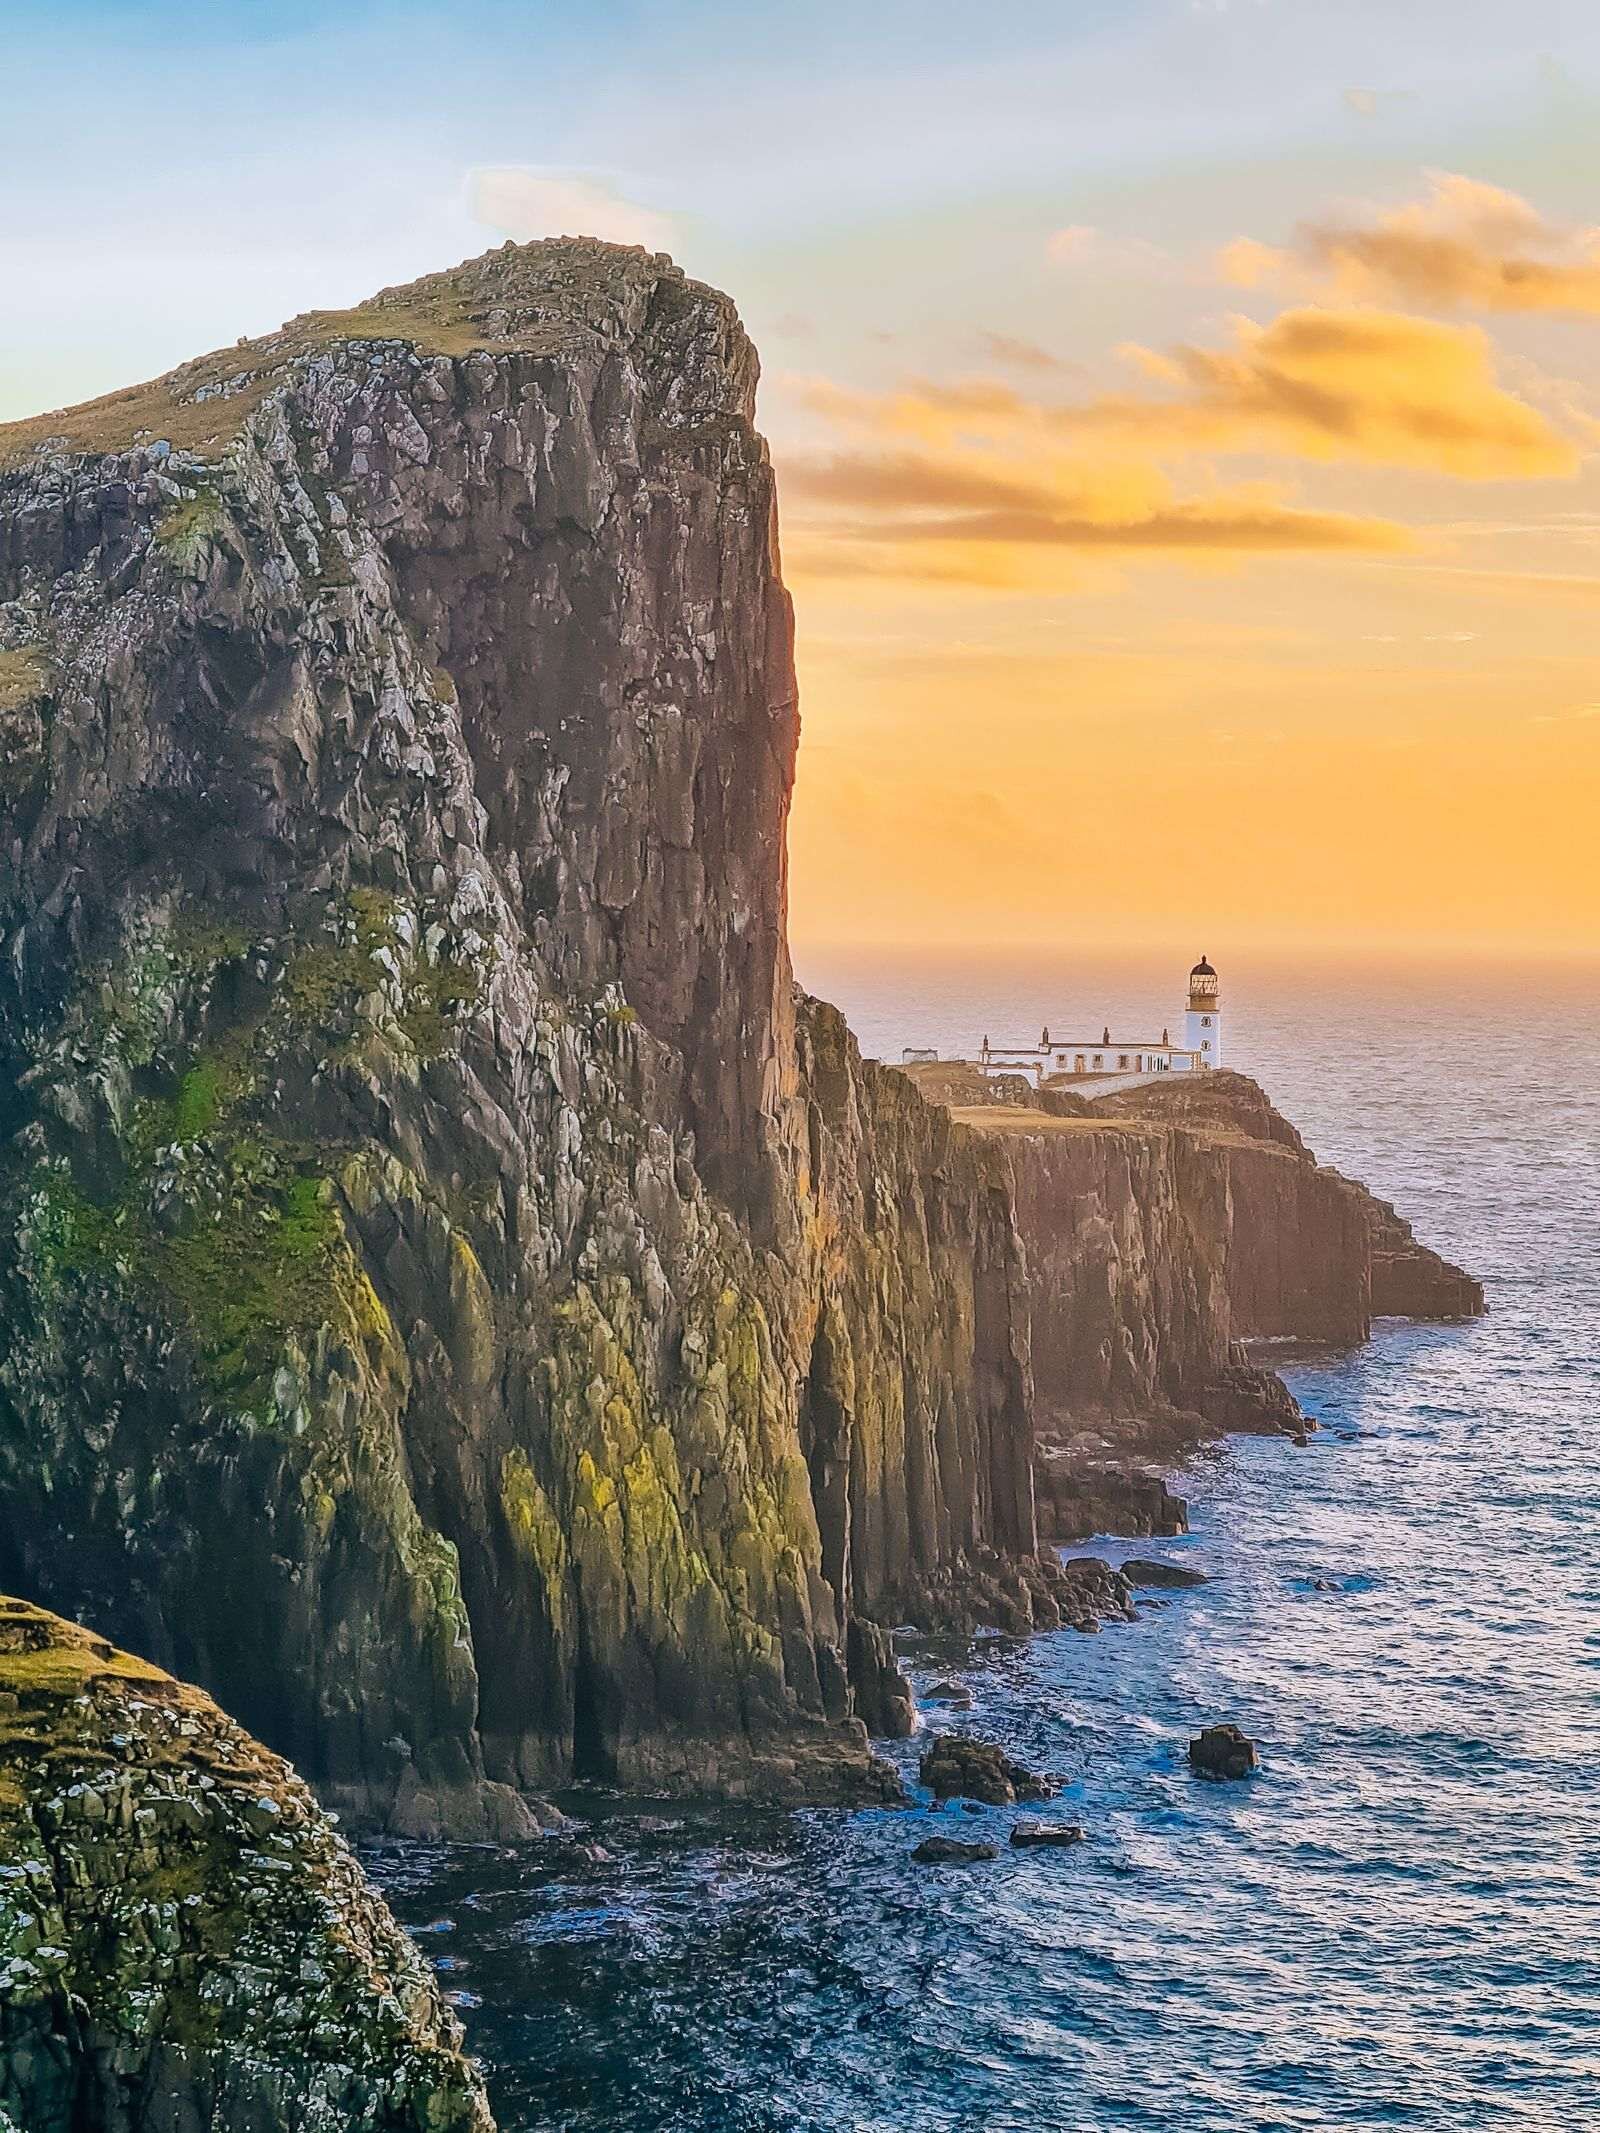 A tall rocky sea cliff which slopes down in the distance with a lghhouse on the end of the rocky peninsula. The sky is orange at sunset.